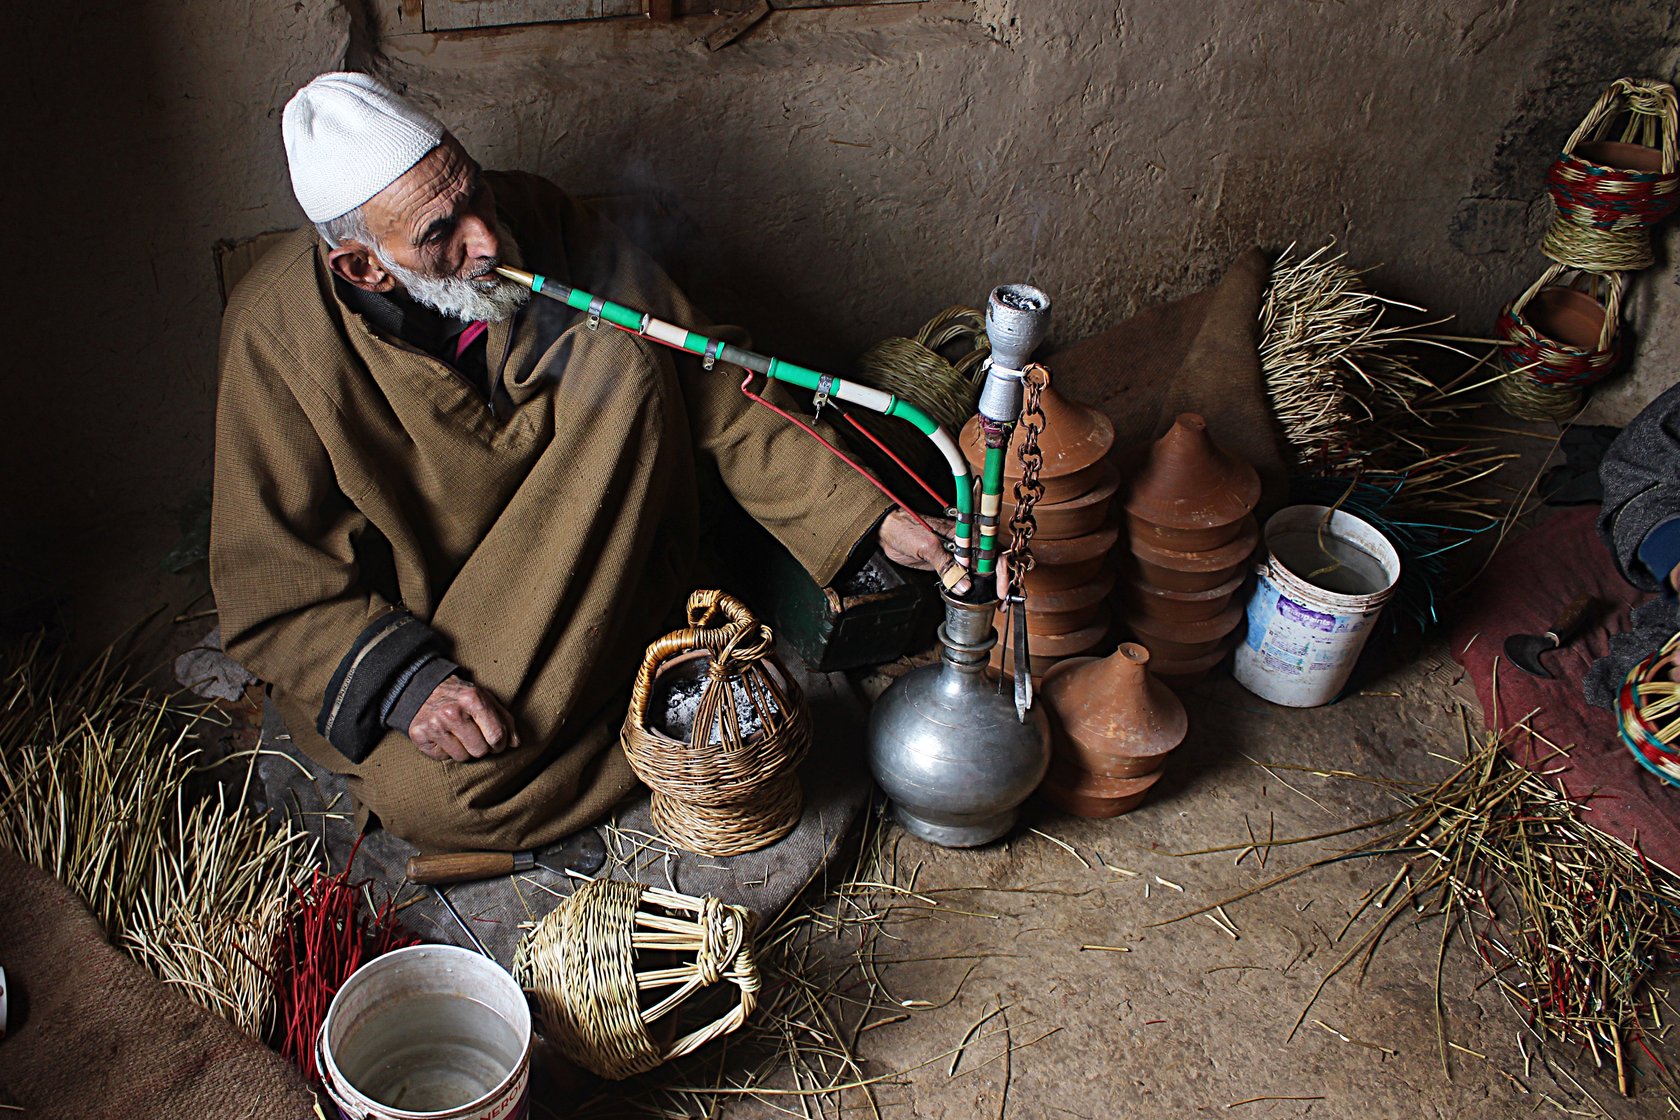 Khazir Mohammad Malik, 86, a resident of Charar-i-Sharief has been in the kangri trade for 70 years. “I inherited this art from my father,” he says. “People in Kashmir cannot survive the winters without a kangri. I feel happy when I see my kangris keeping people warm” 